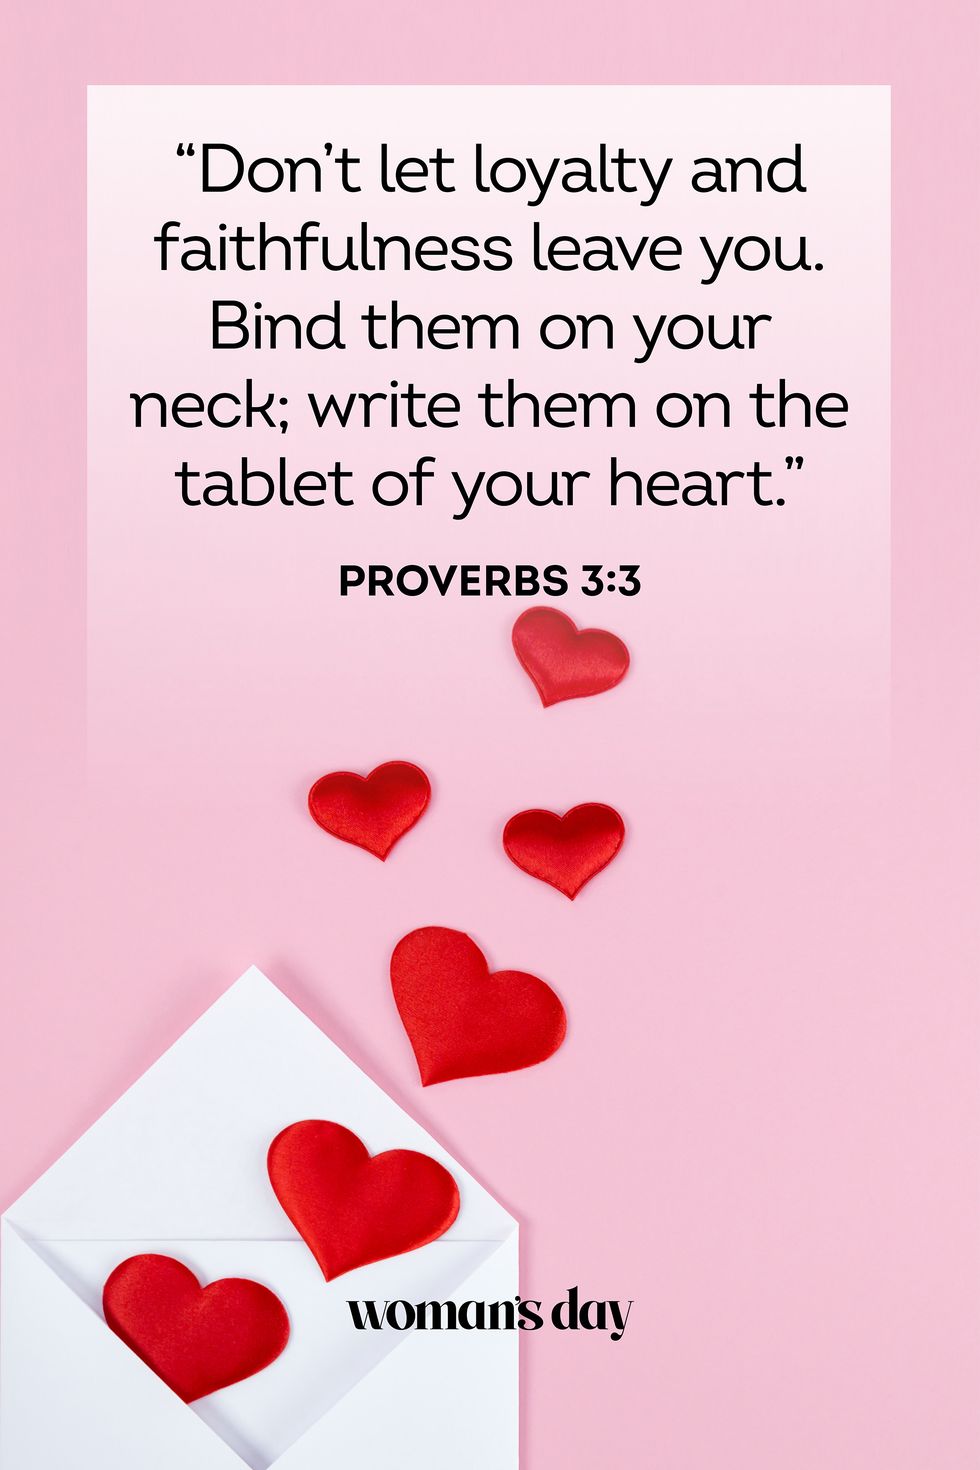 bible verses about marriage proverbs 3 3